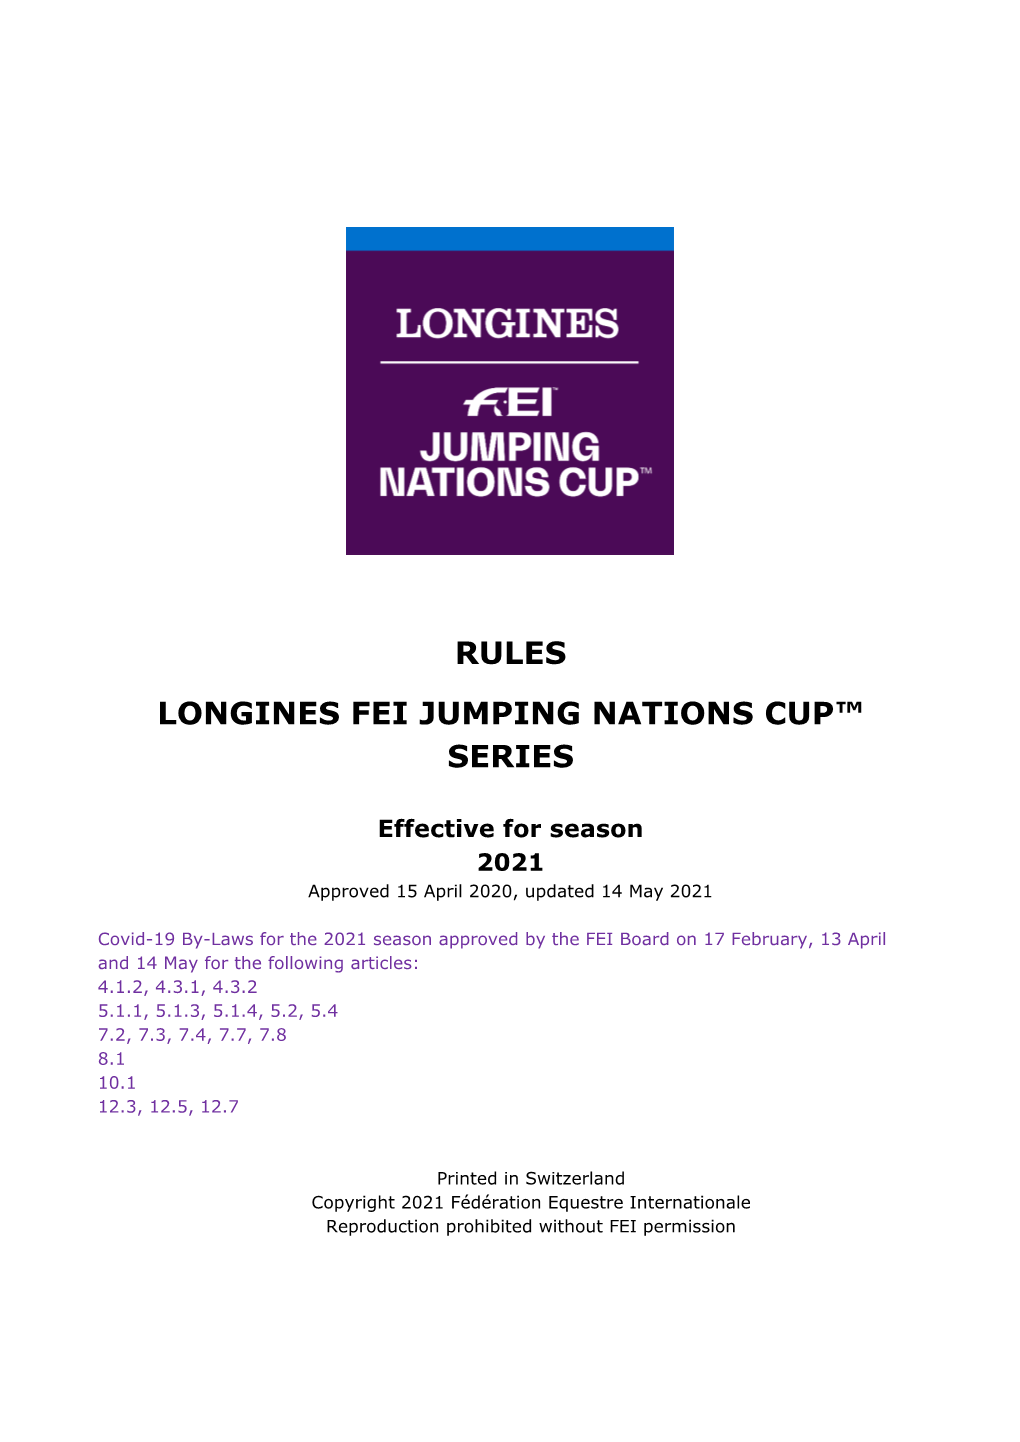 Rules Longines Fei Jumping Nations Cup™ Series